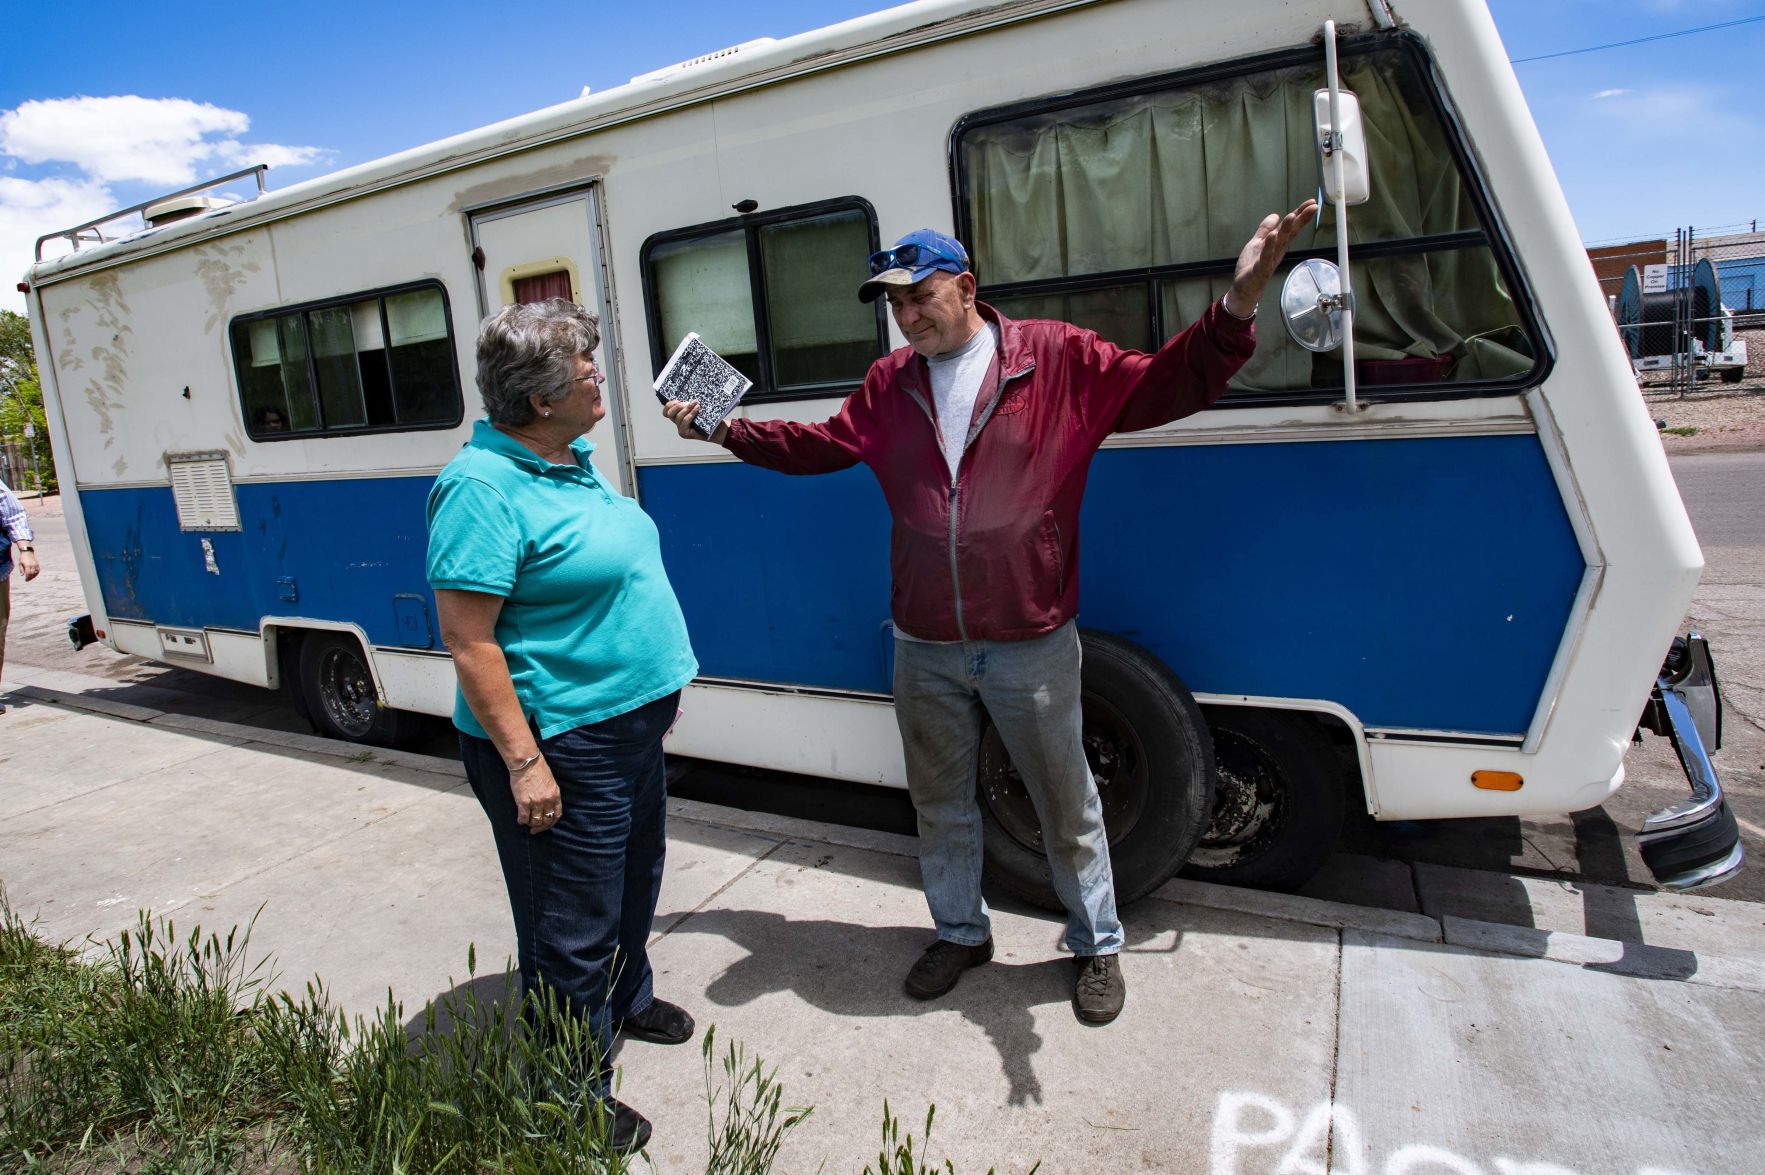 RV owners must move, or face tickets, as Colorado Springs street parking ban takes effect News gazette